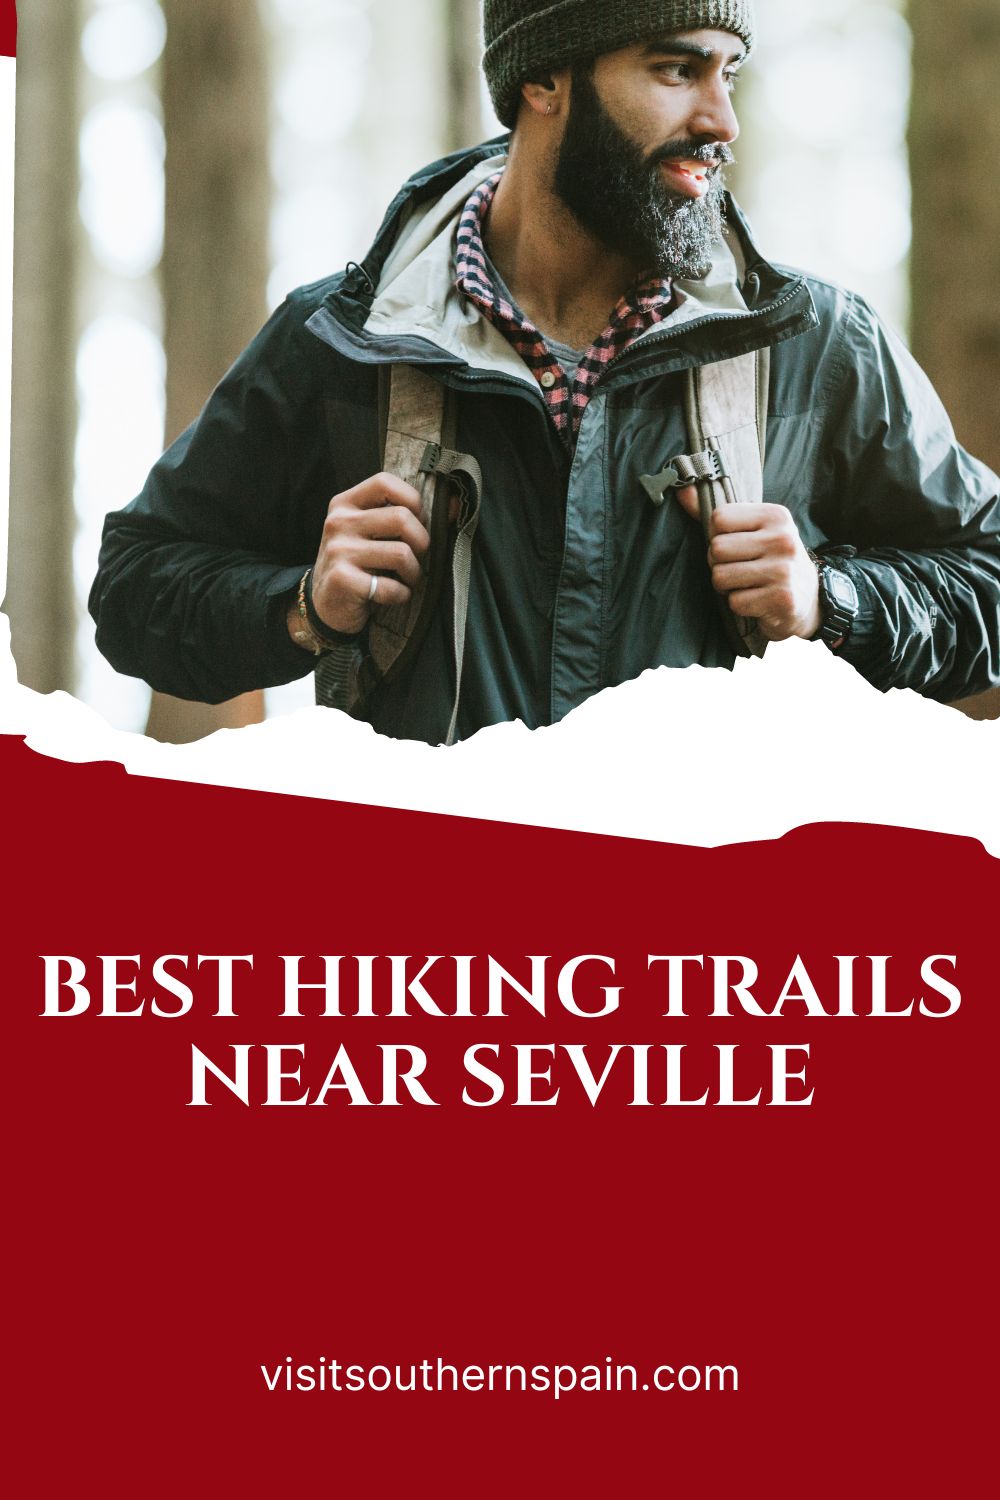 Best hiking trails near seville, a man with a backpack that seems walking